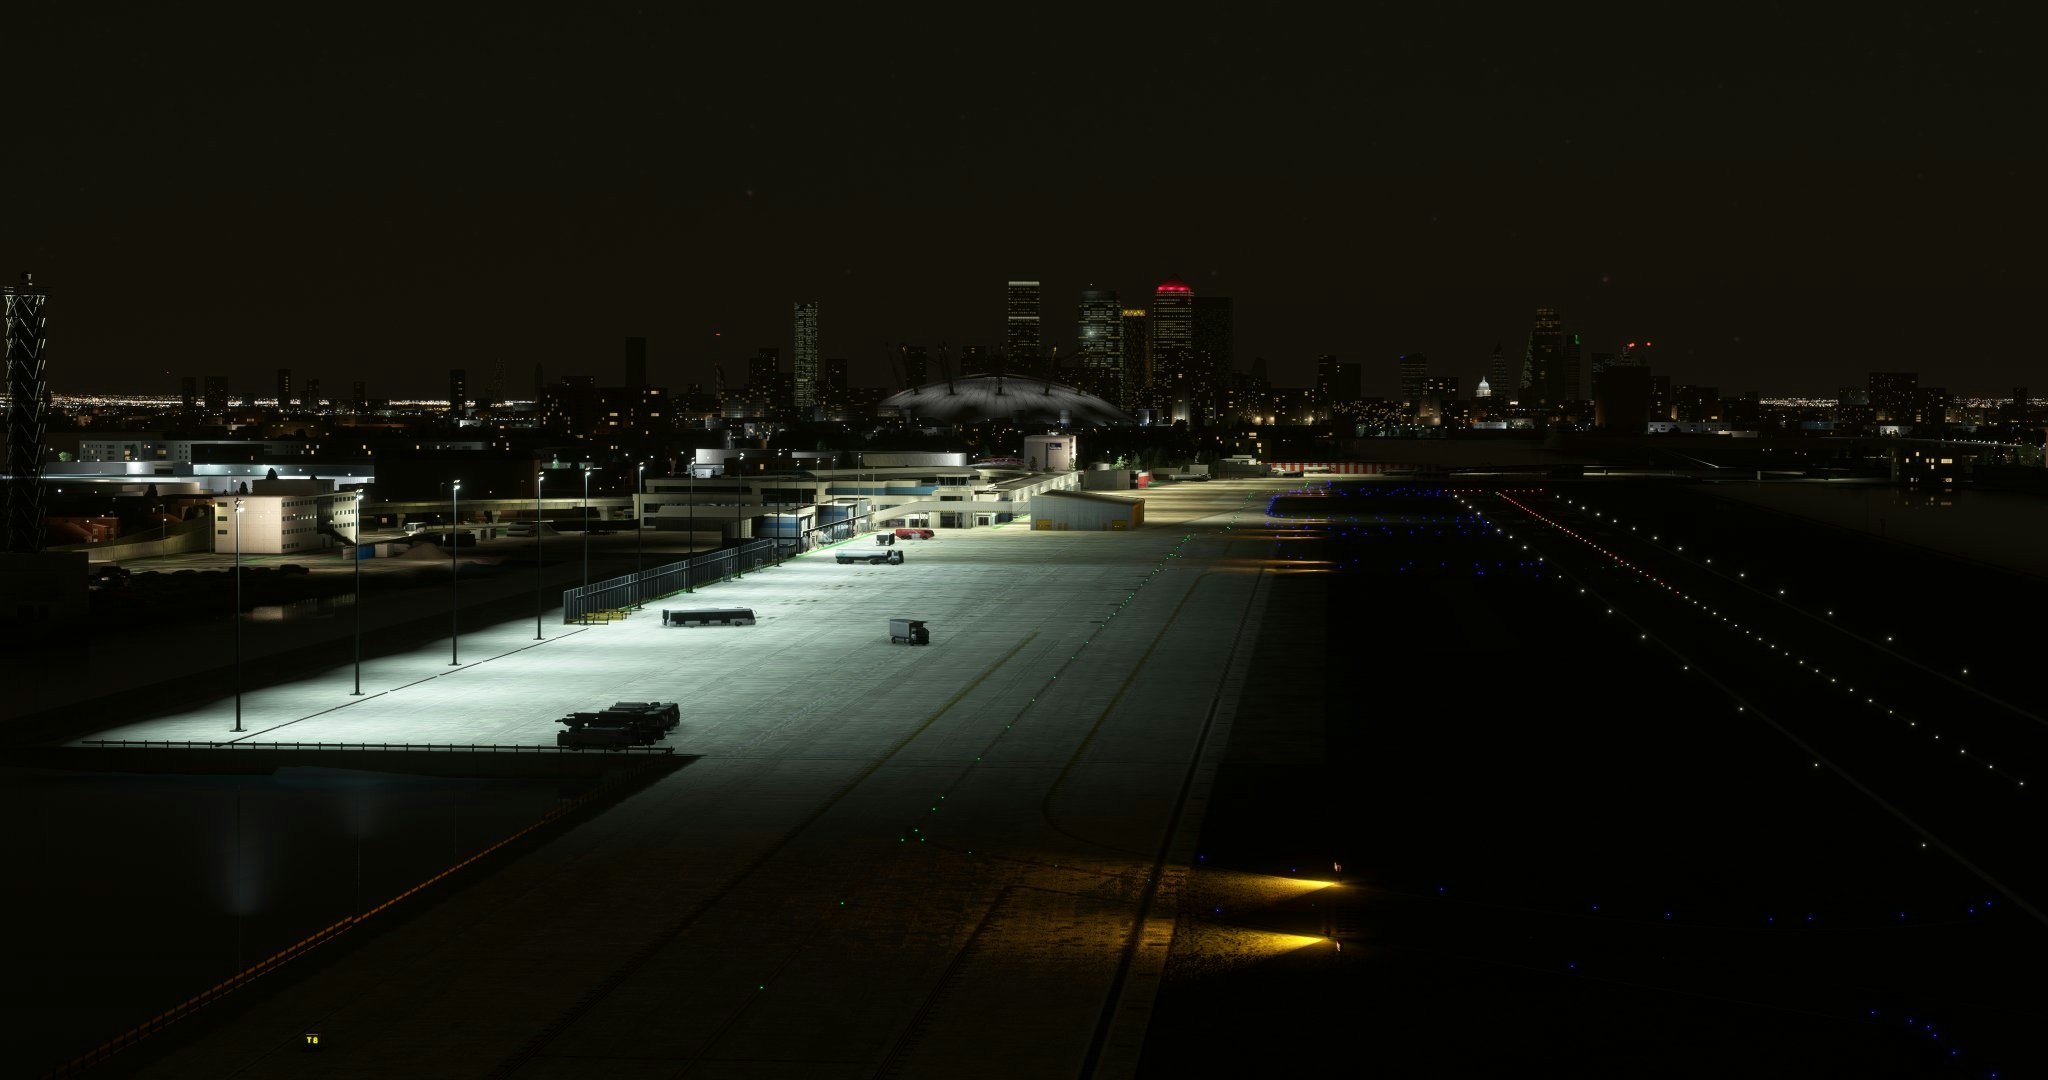 UK2000 Scenery Announces London City Airport for MSFS, Releasing May 4th